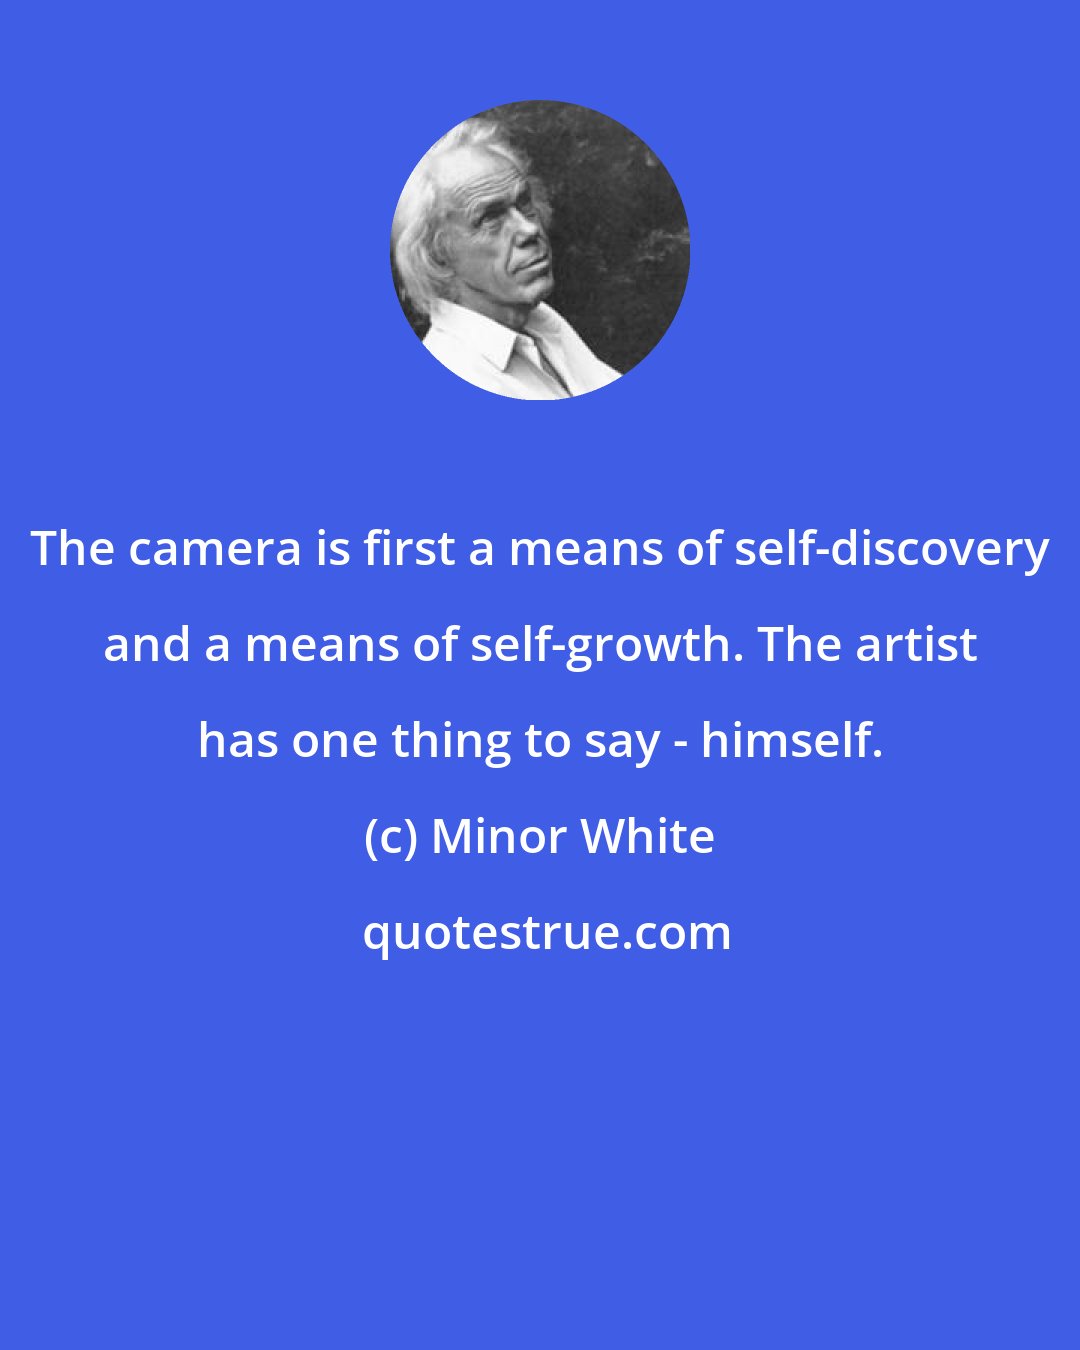 Minor White: The camera is first a means of self-discovery and a means of self-growth. The artist has one thing to say - himself.